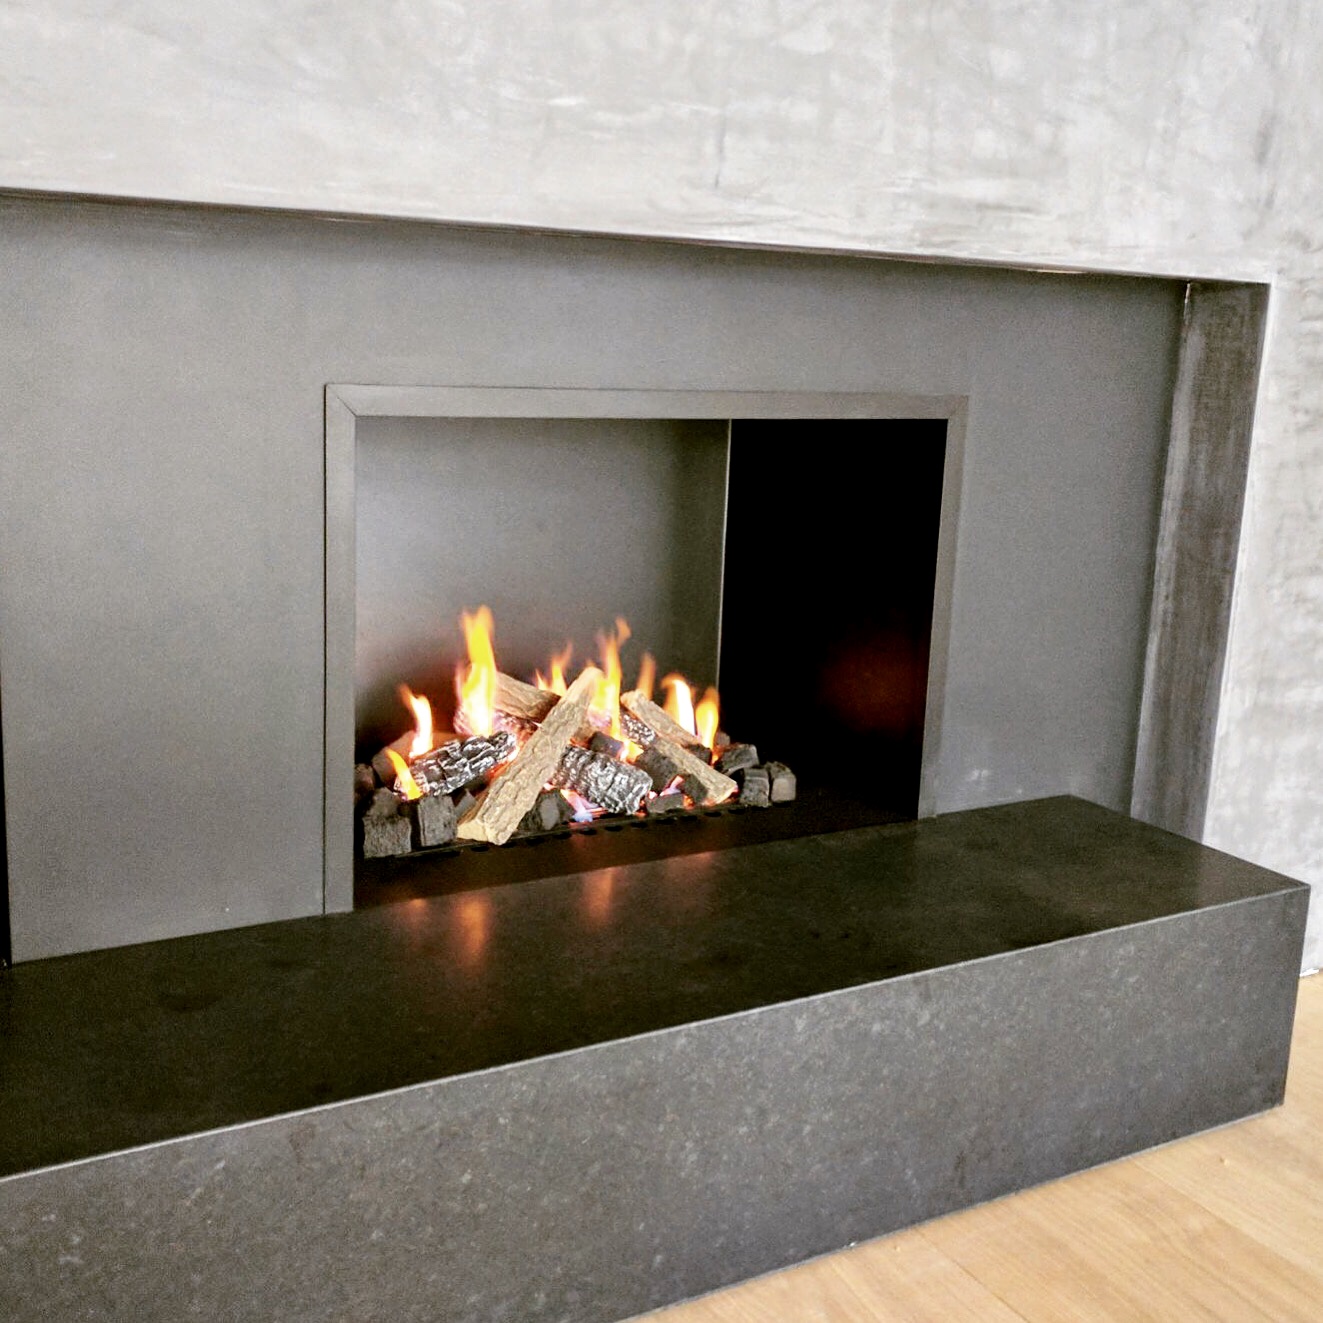 Gas Fire Electric Or Bioethanol, Ethanol Fuel Fireplace Pros And Cons